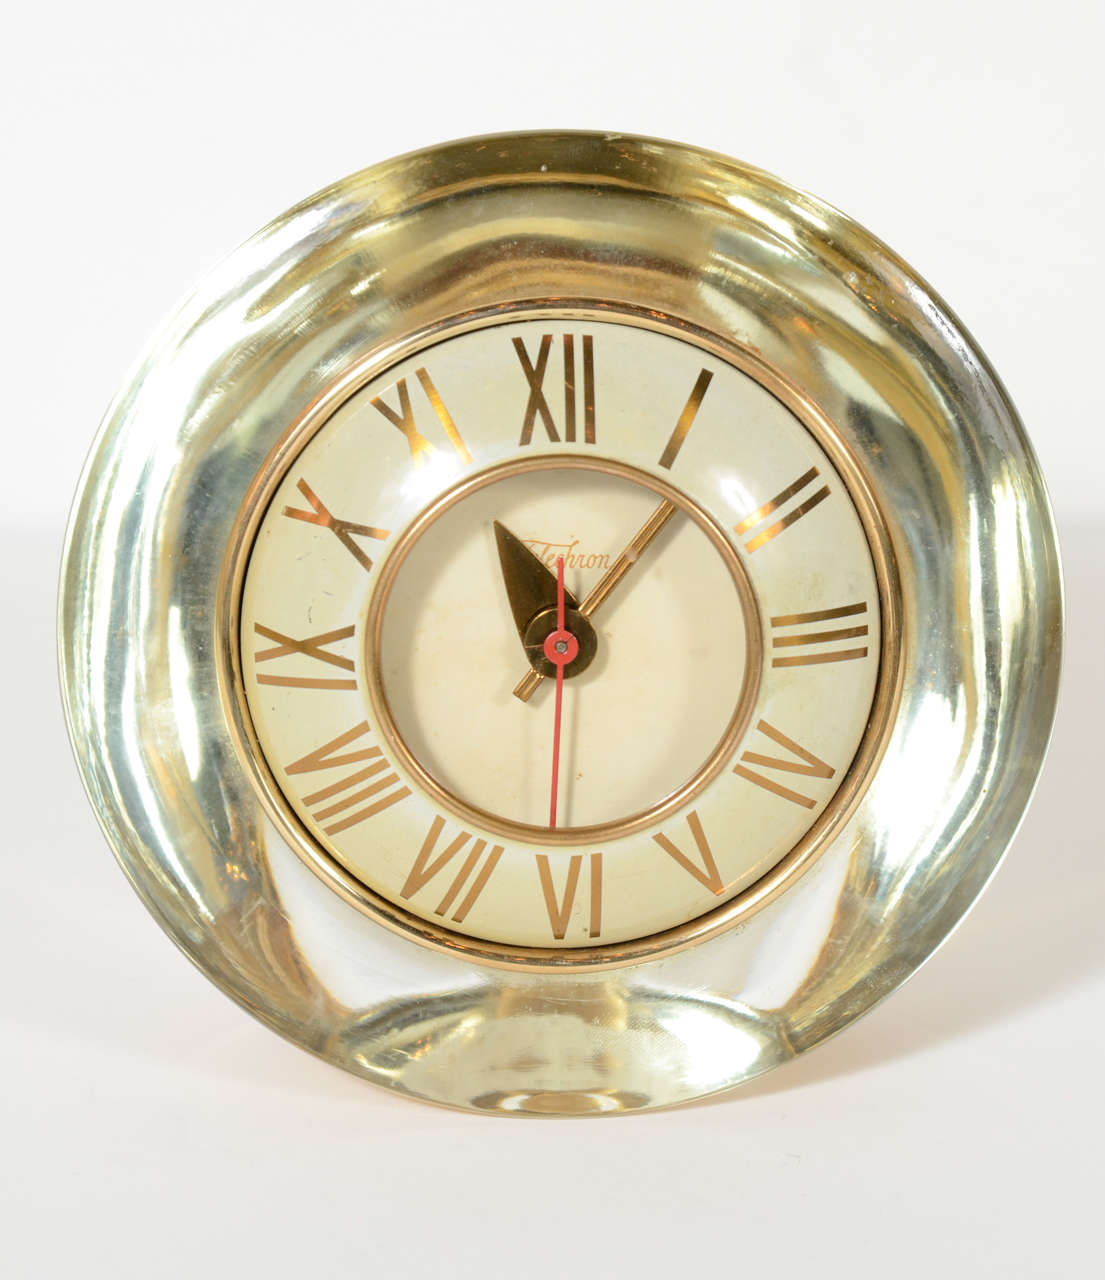 This gorgeous clock features a three dimensional case of hand blown glass incased in gold mercury glass. The face of the clock is white enamel with gilt fittings and is made by Telechron co. It works perfectly and would be a stunning addition to any